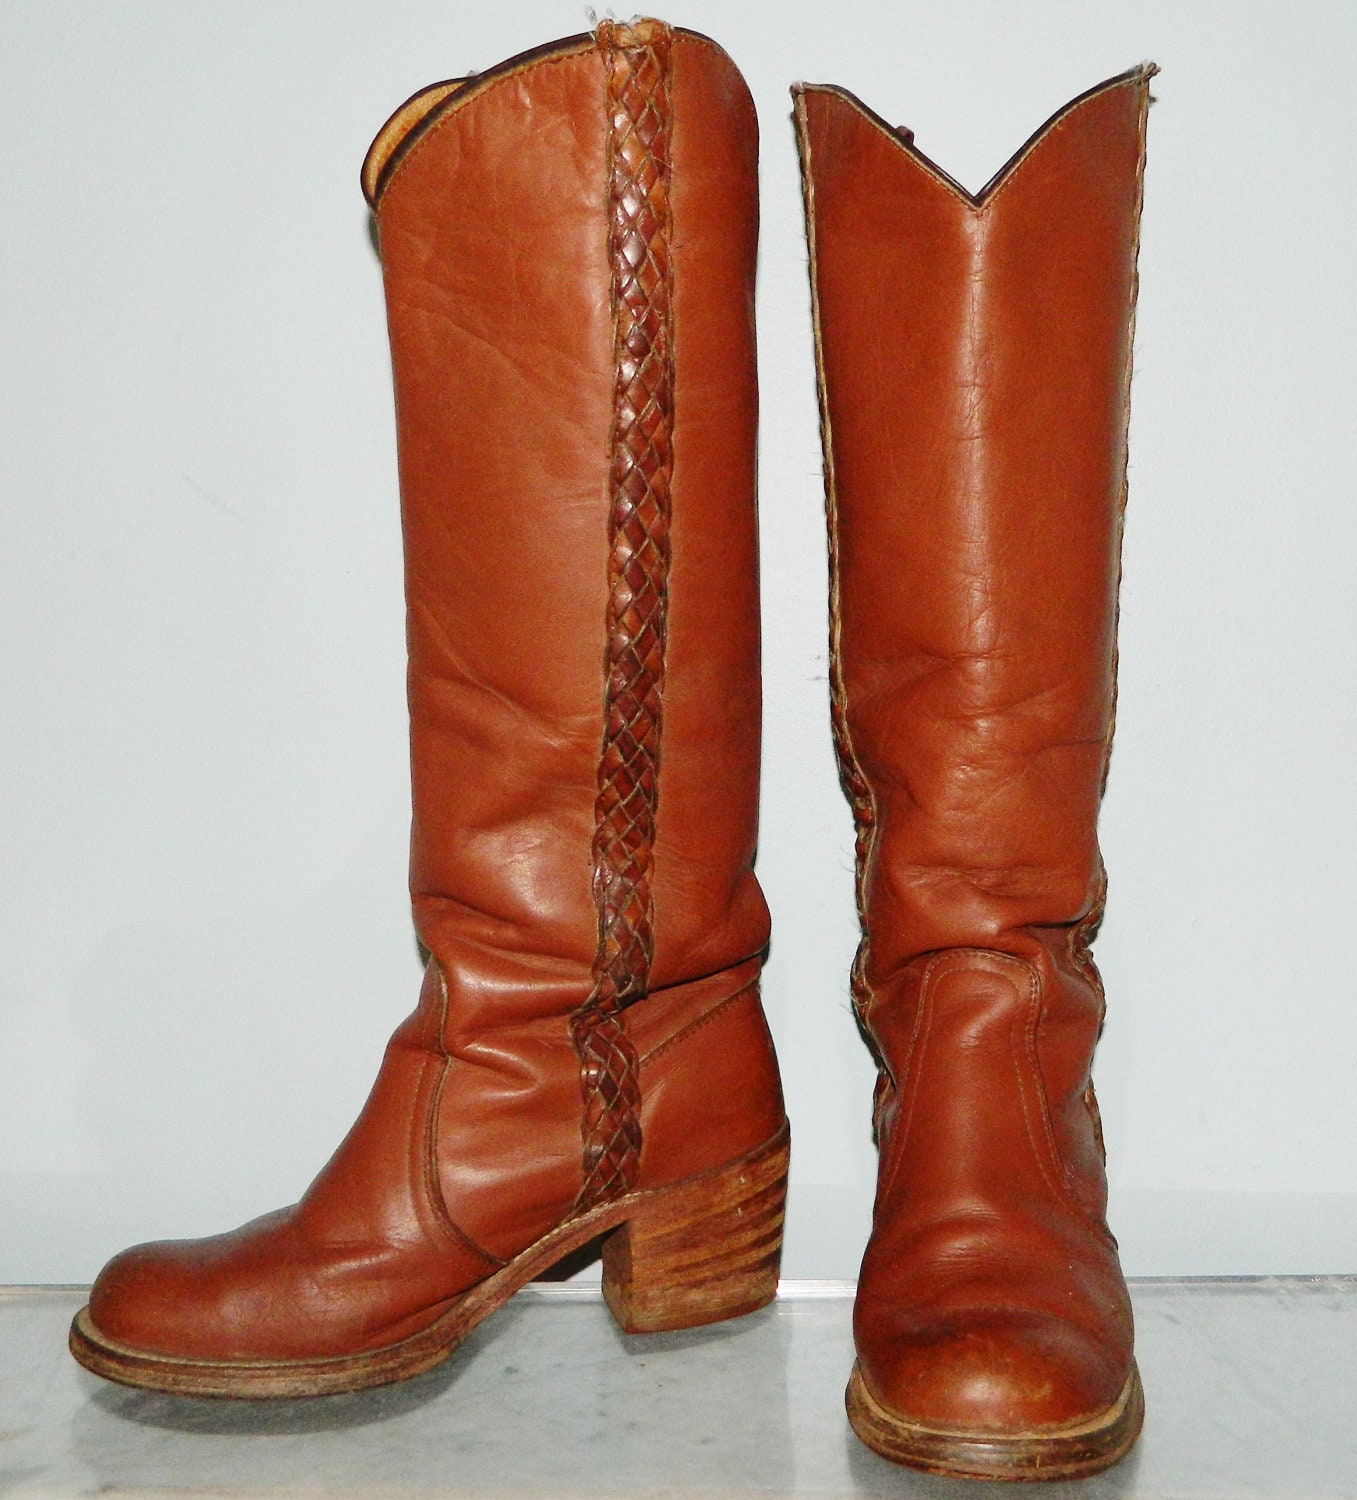 vintage frye boots 70s leather 6.5 braided campus riding boots